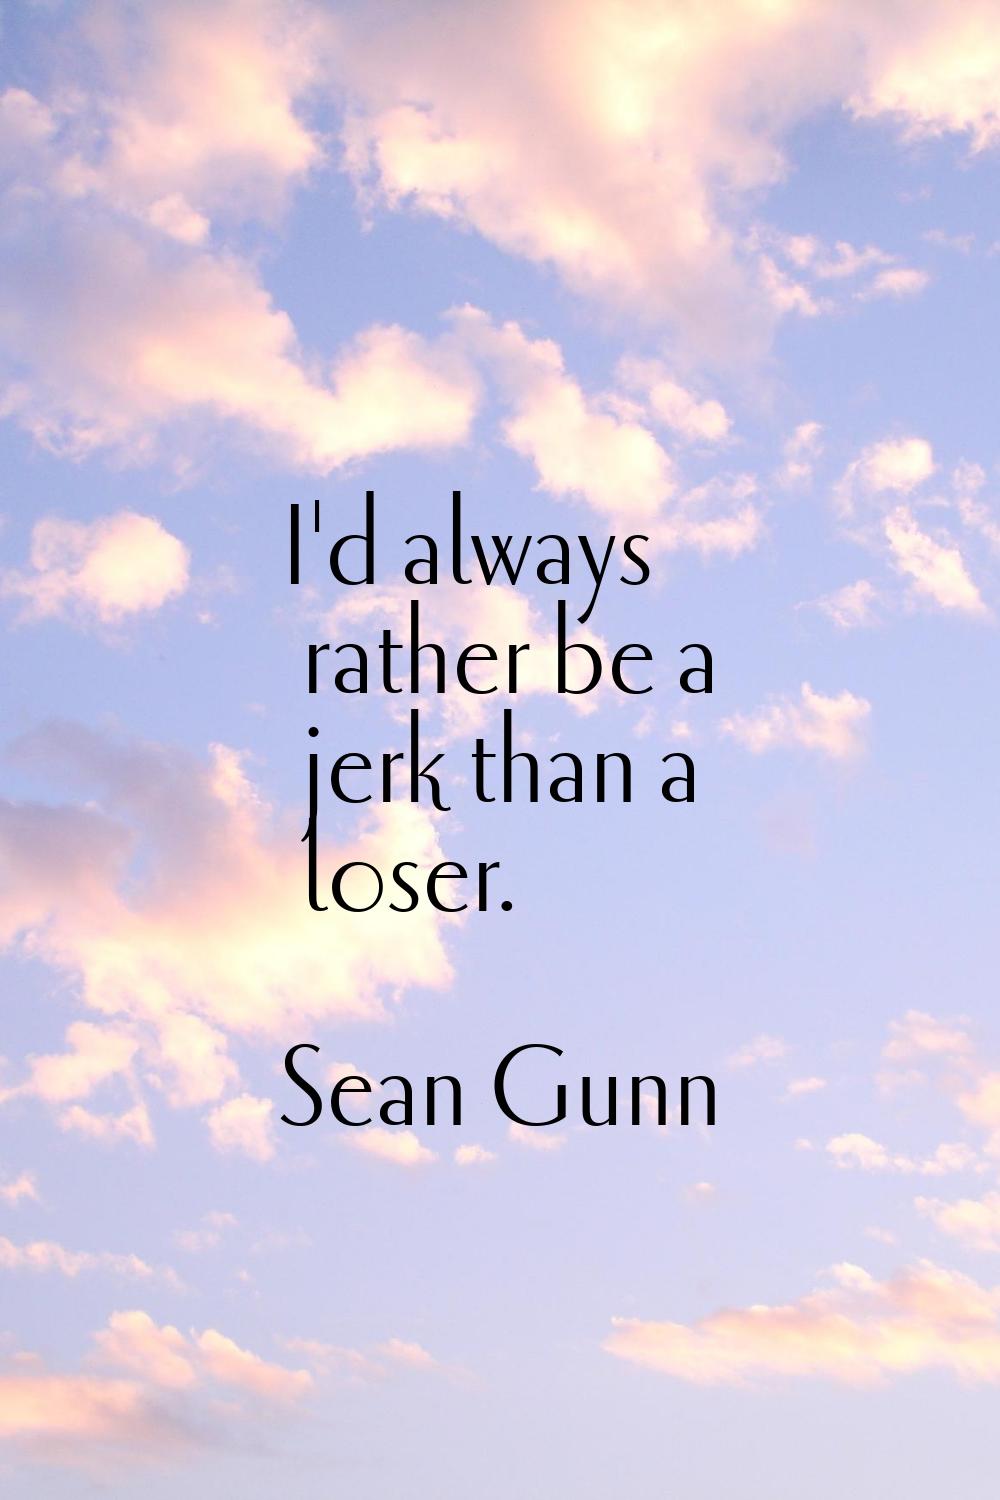 I'd always rather be a jerk than a loser.